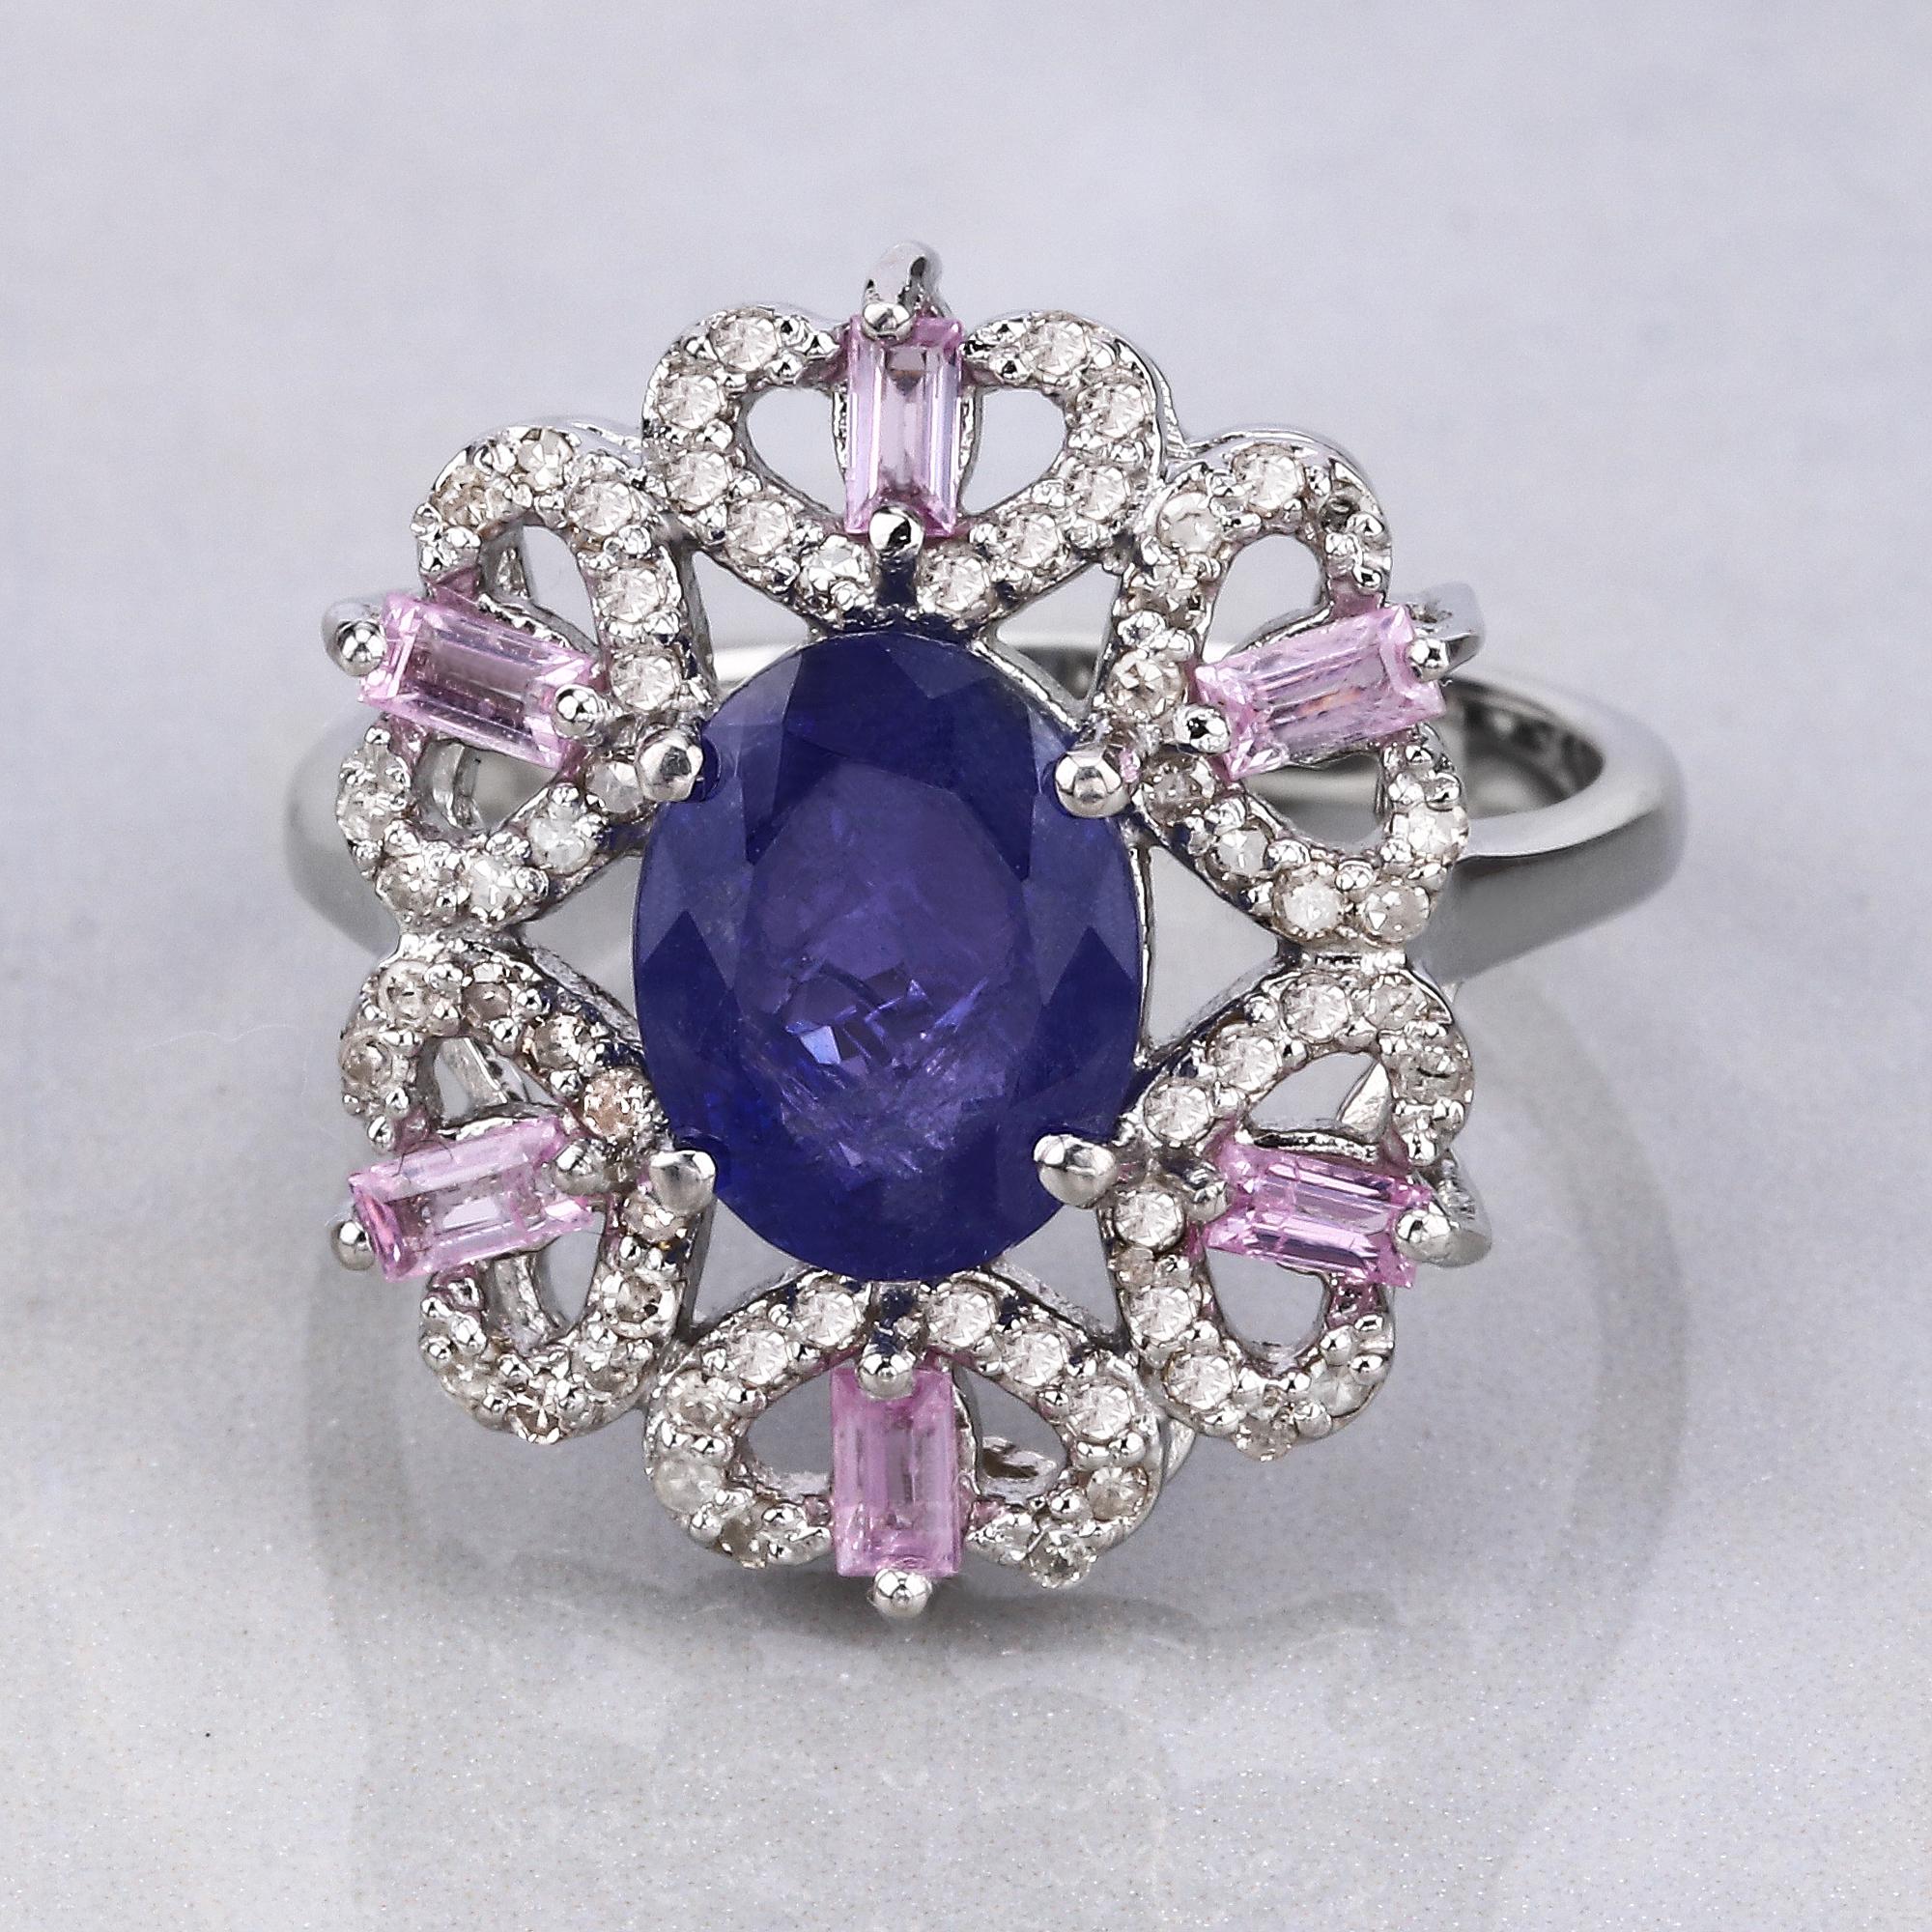 3.01cttw Tanzanite, Pink Sapphires with Diamonds 0.41cttw Sterling Silver Ring 1